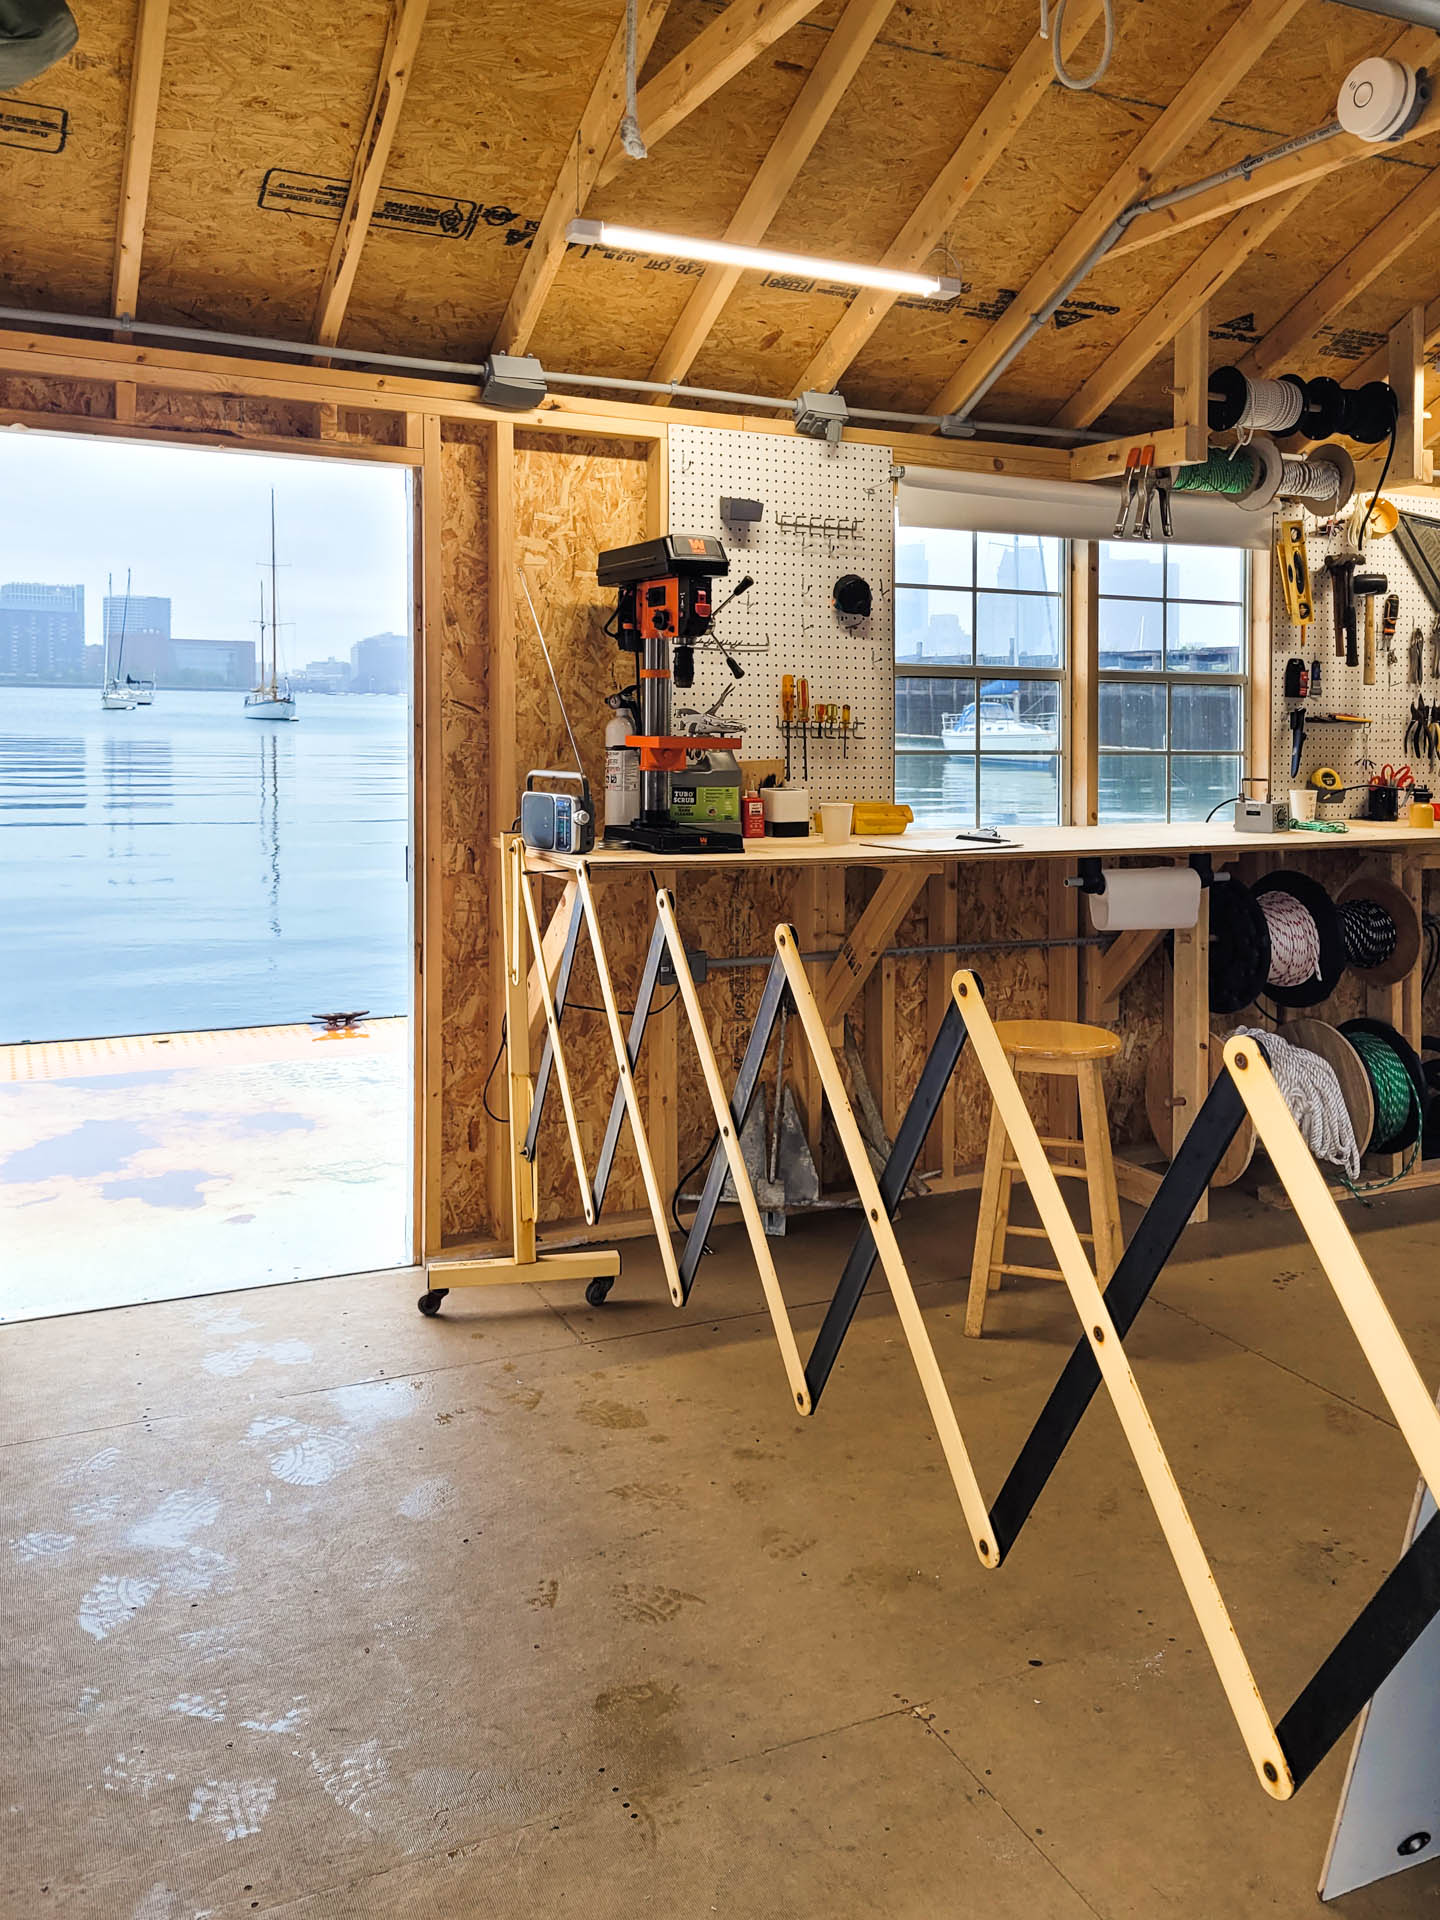 A workbench in a harbor-side shed in Boston, MA.